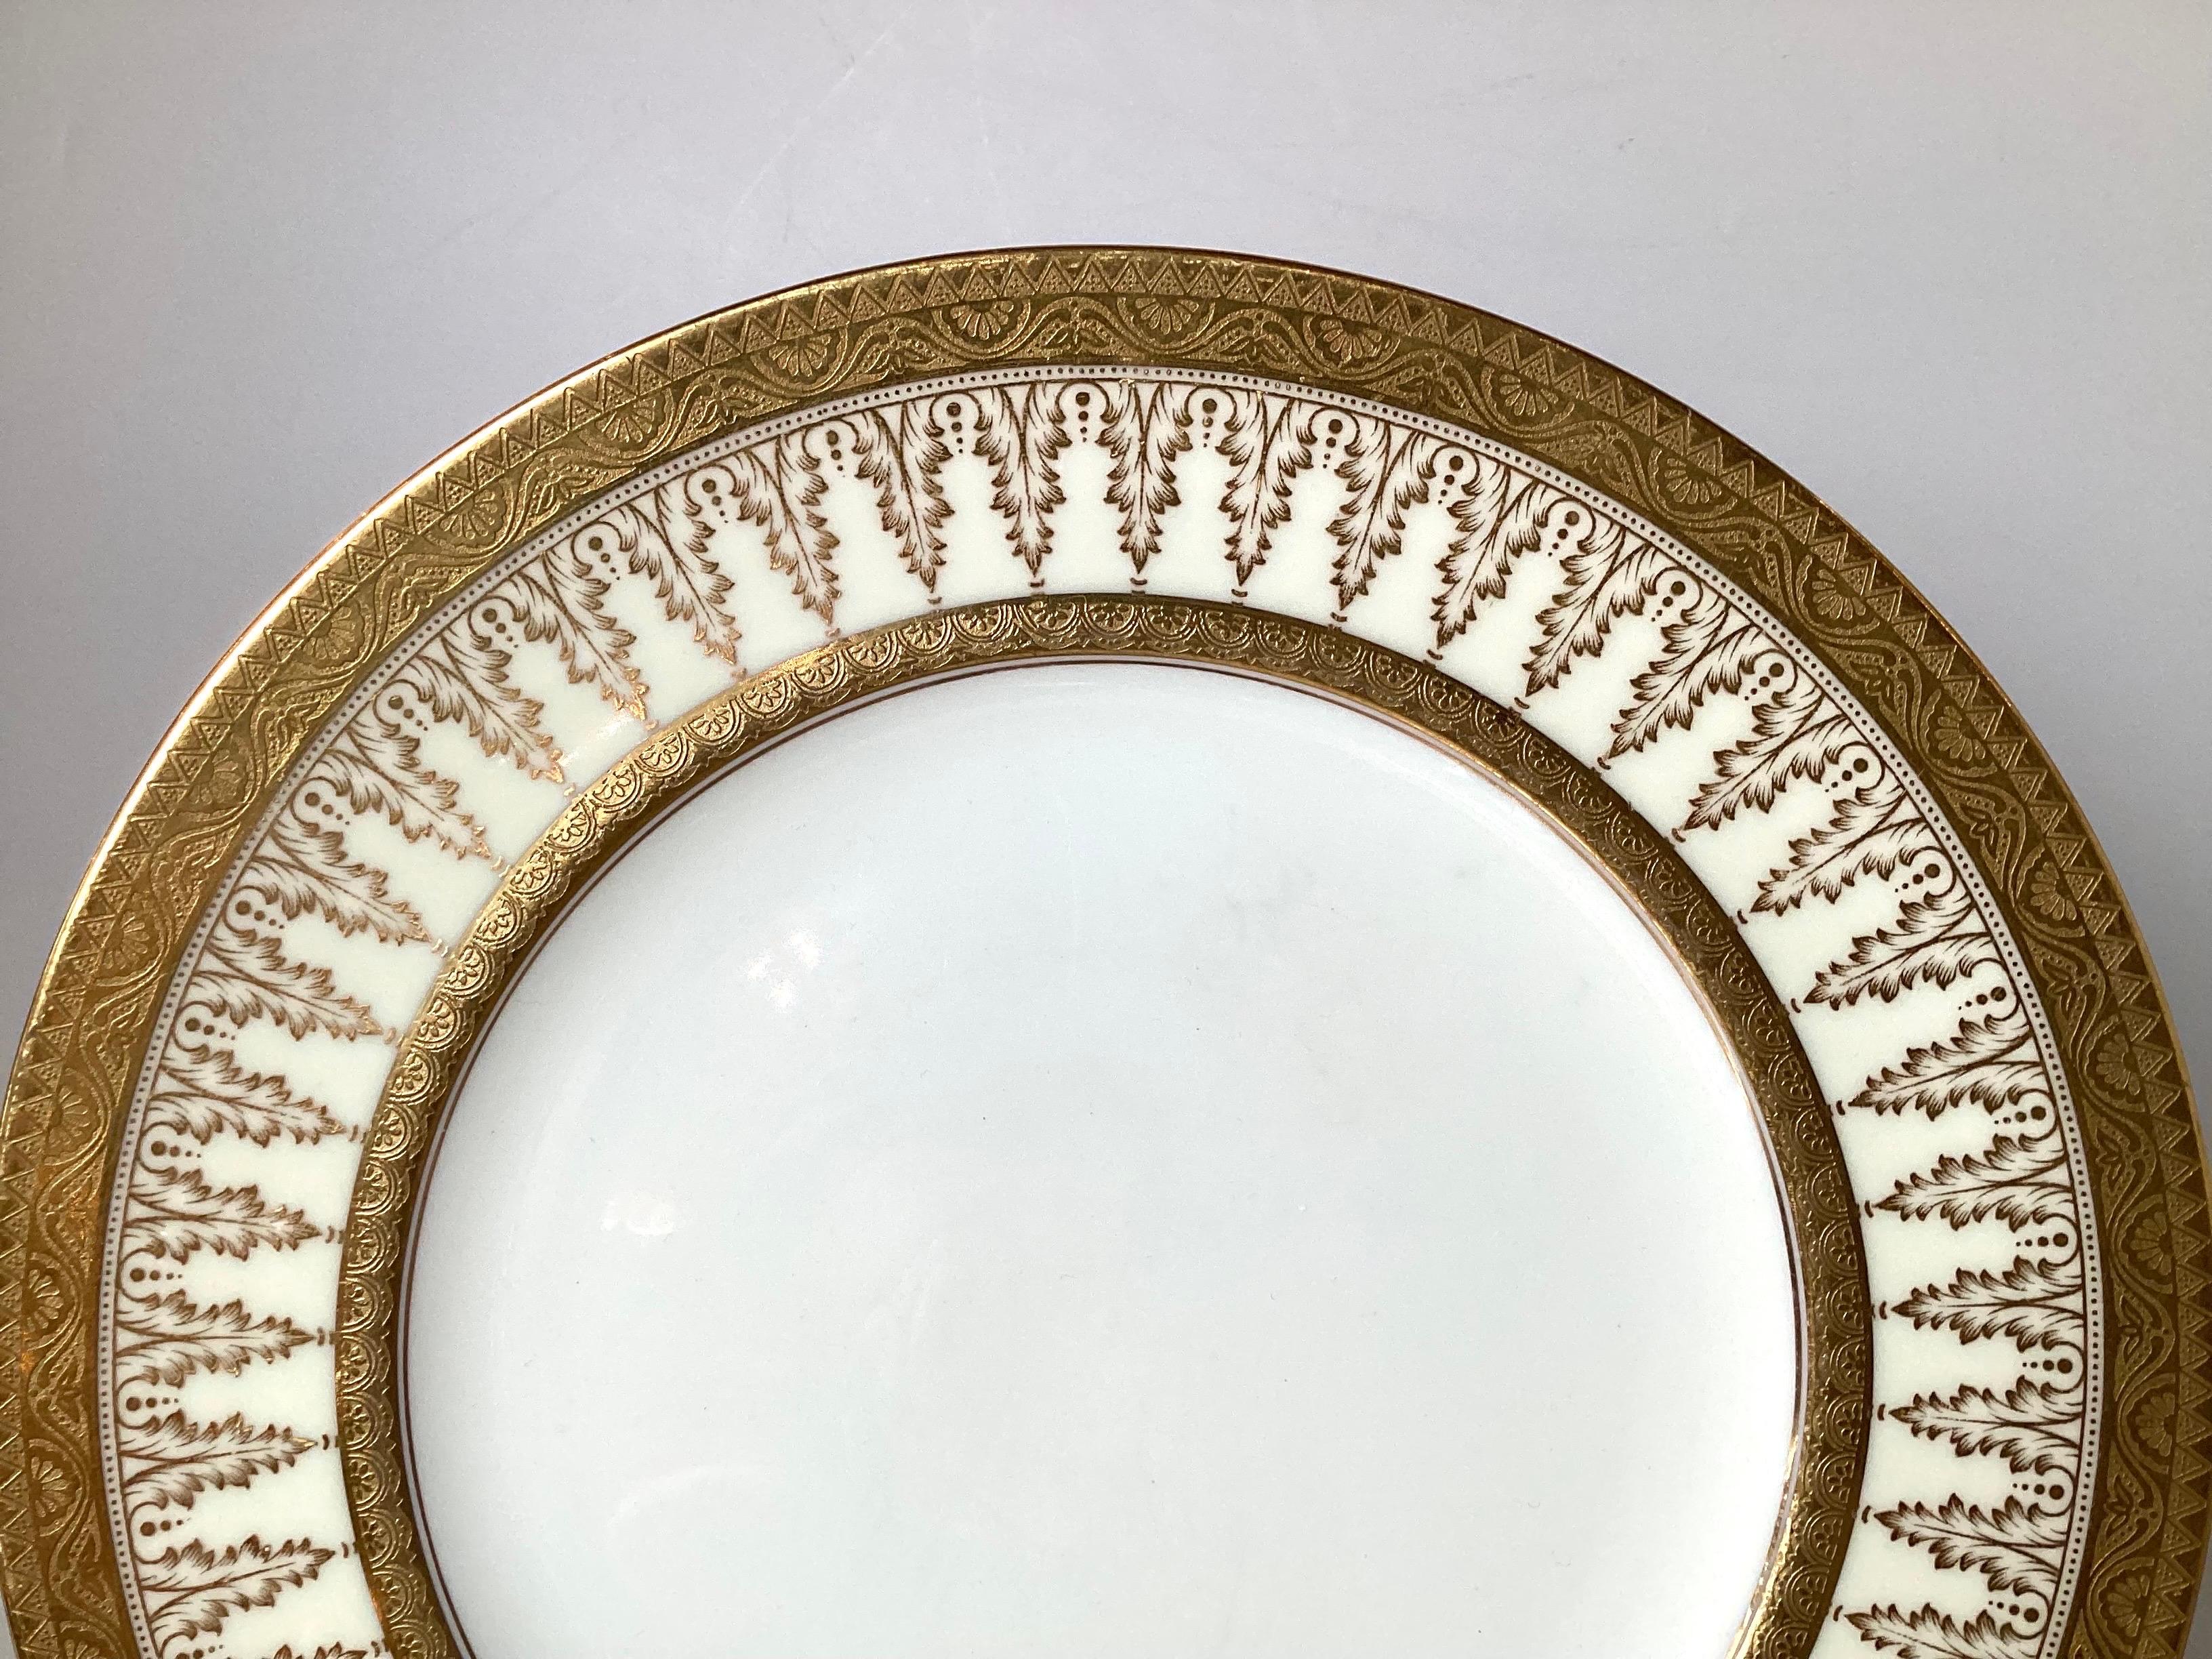 A set of ten elegant Edwardian service plates made by Cauldon. The gold borders with repeated acanthus leaf decoration, retailed by Tiffany, early 20th century England.